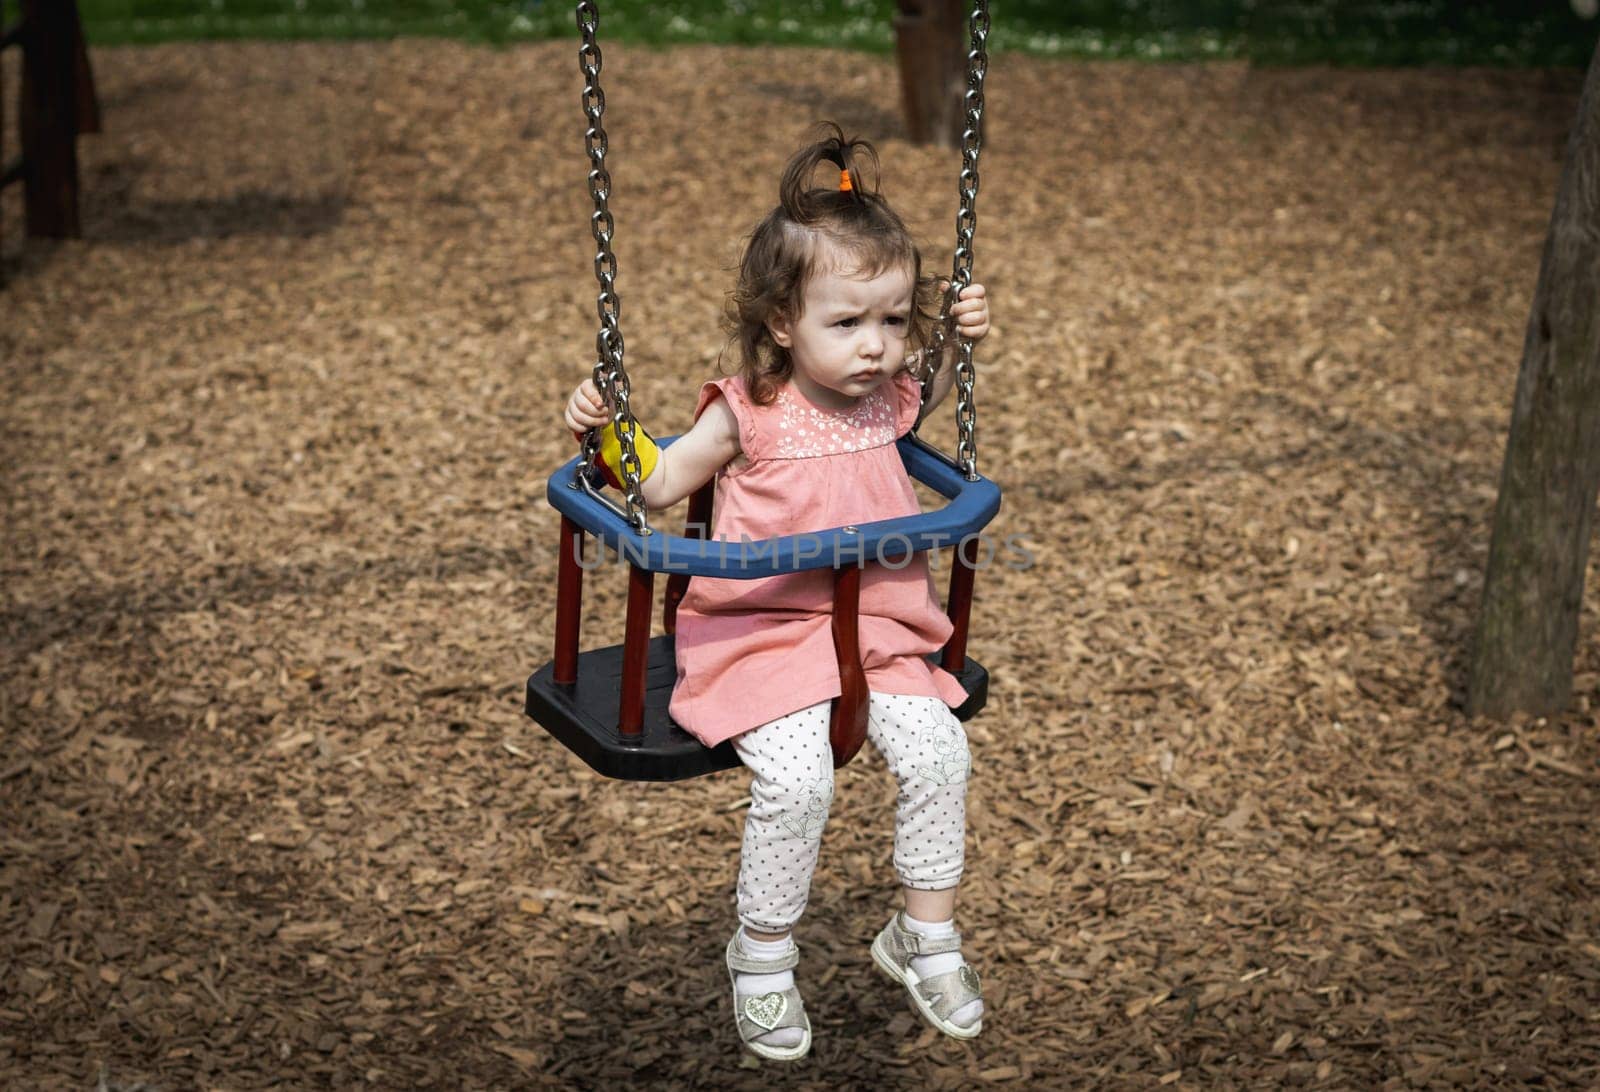 Portrait of a little girl riding on a swing. by Nataliya